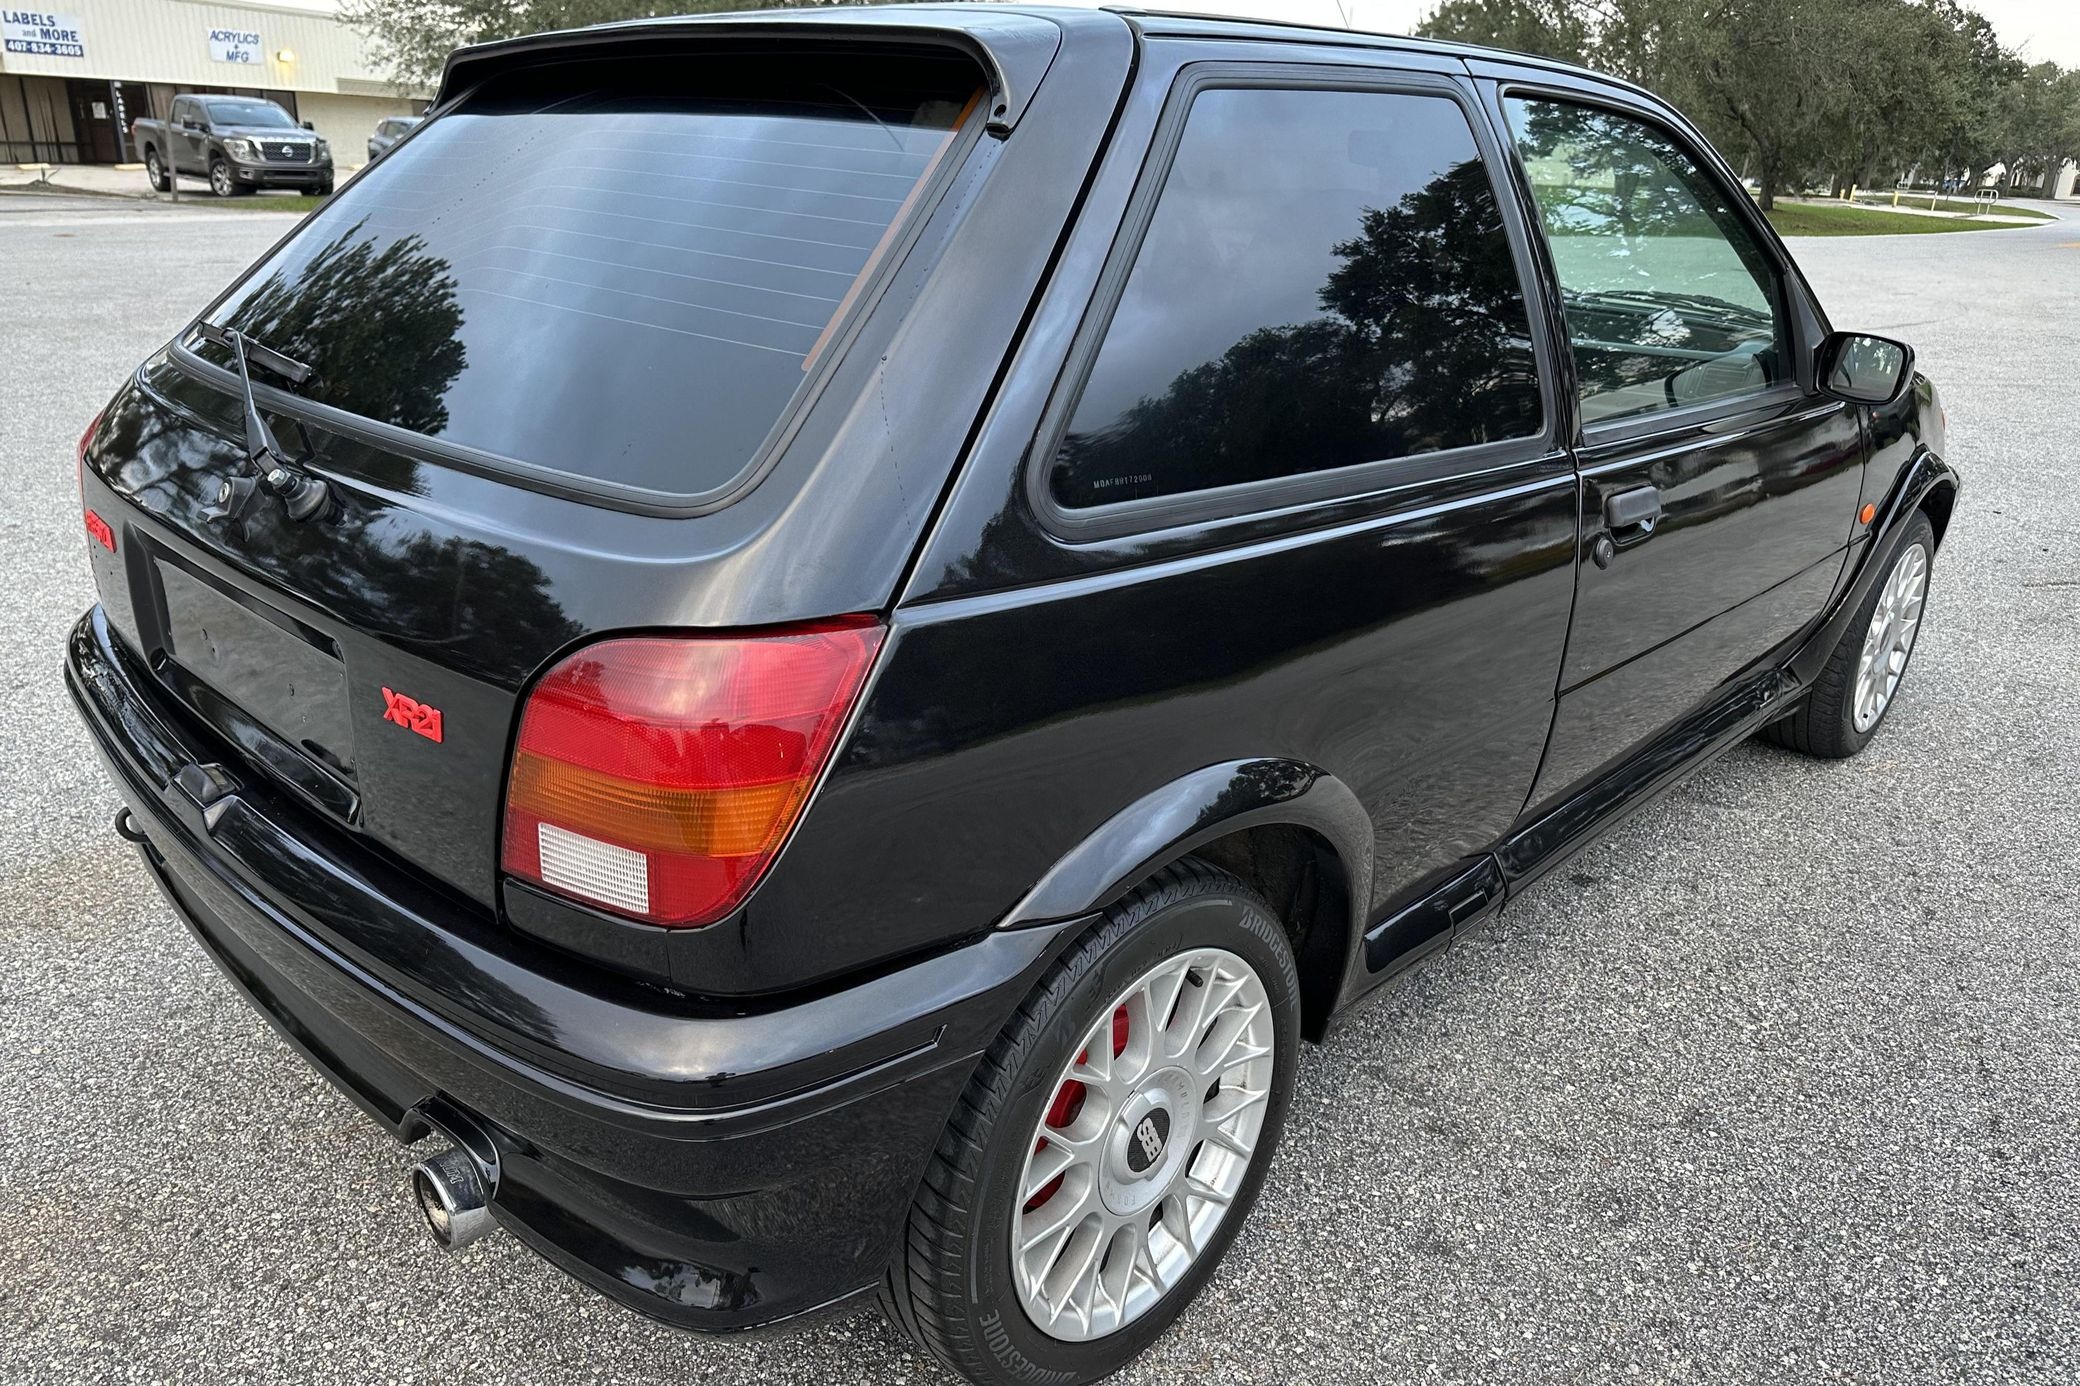 Salir eternamente escaramuza Imported 1994 Ford Fiesta XR2i Up For Auction